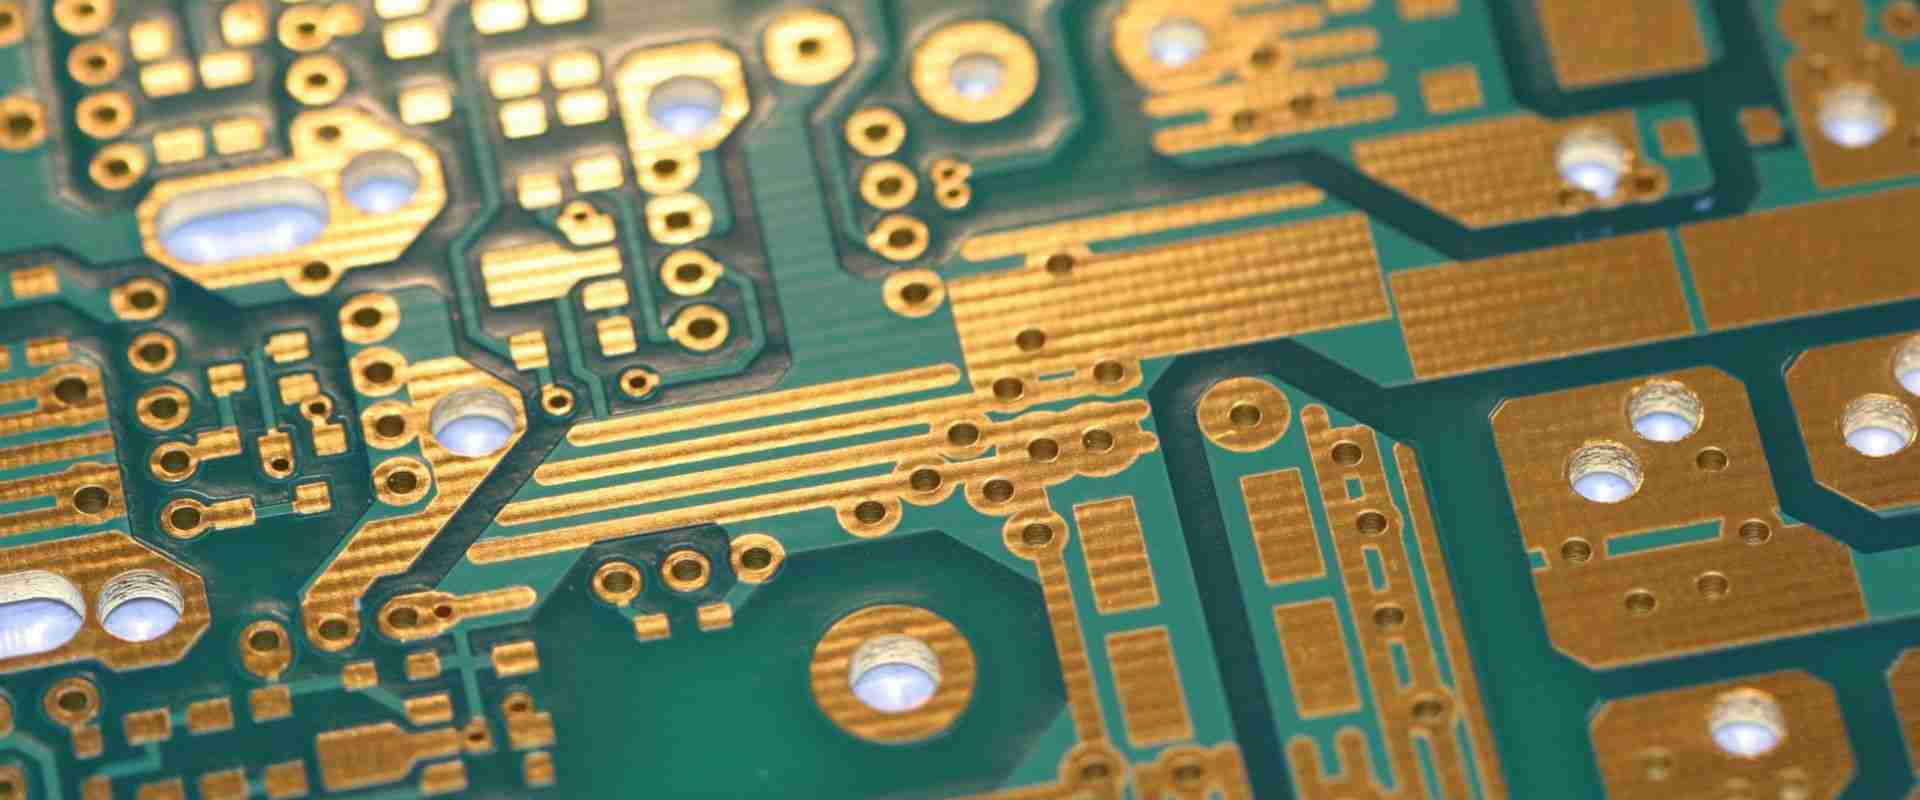 Copper plate for printed circuit boards